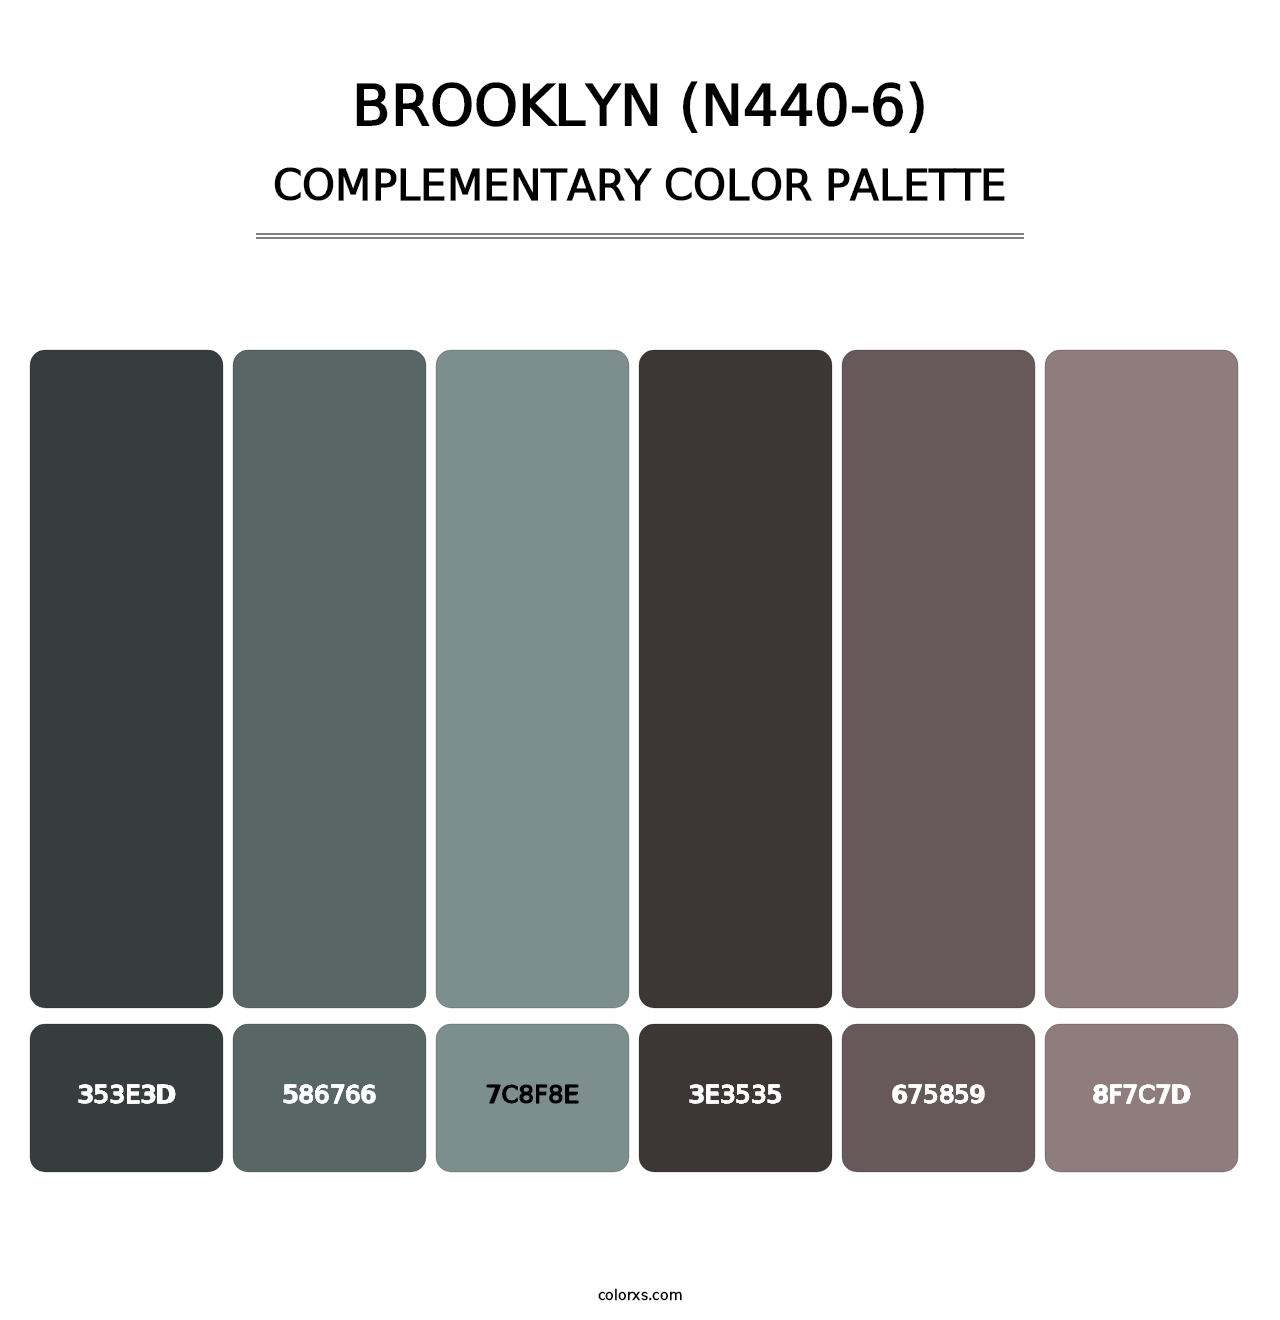 Brooklyn (N440-6) - Complementary Color Palette